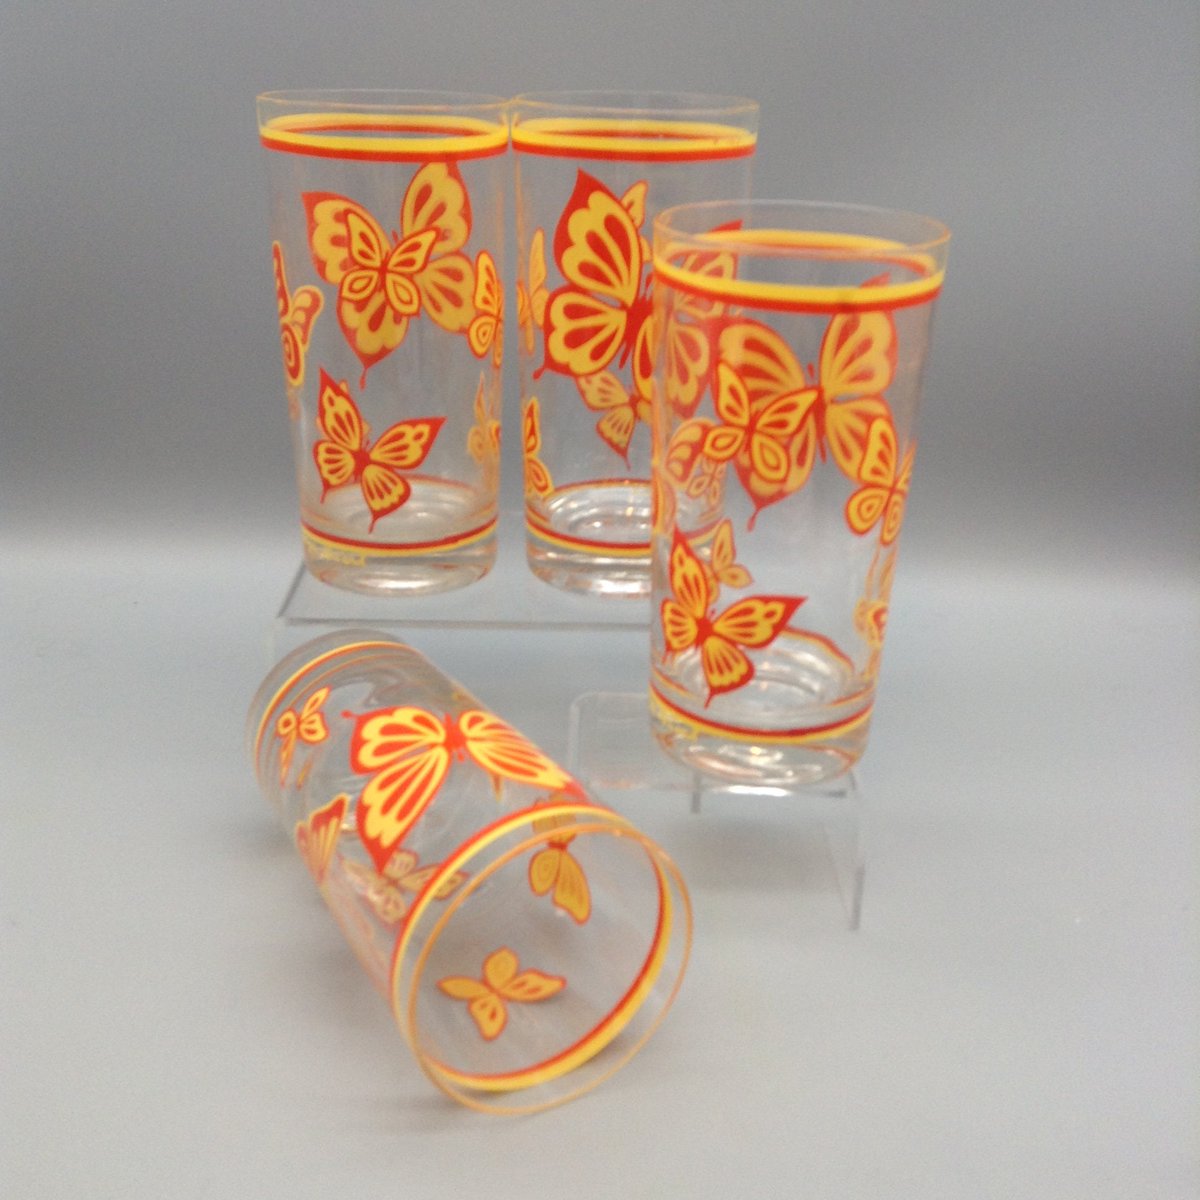 Excited to share the latest addition to my #etsy shop: Georges Briard Orange and Yellow Butterfly Tumblers etsy.me/36WWSl1 #orange #yellow #glass #georgesbraird #braird #orangeglass #yellowglass #butterflypattern #glasstumblers